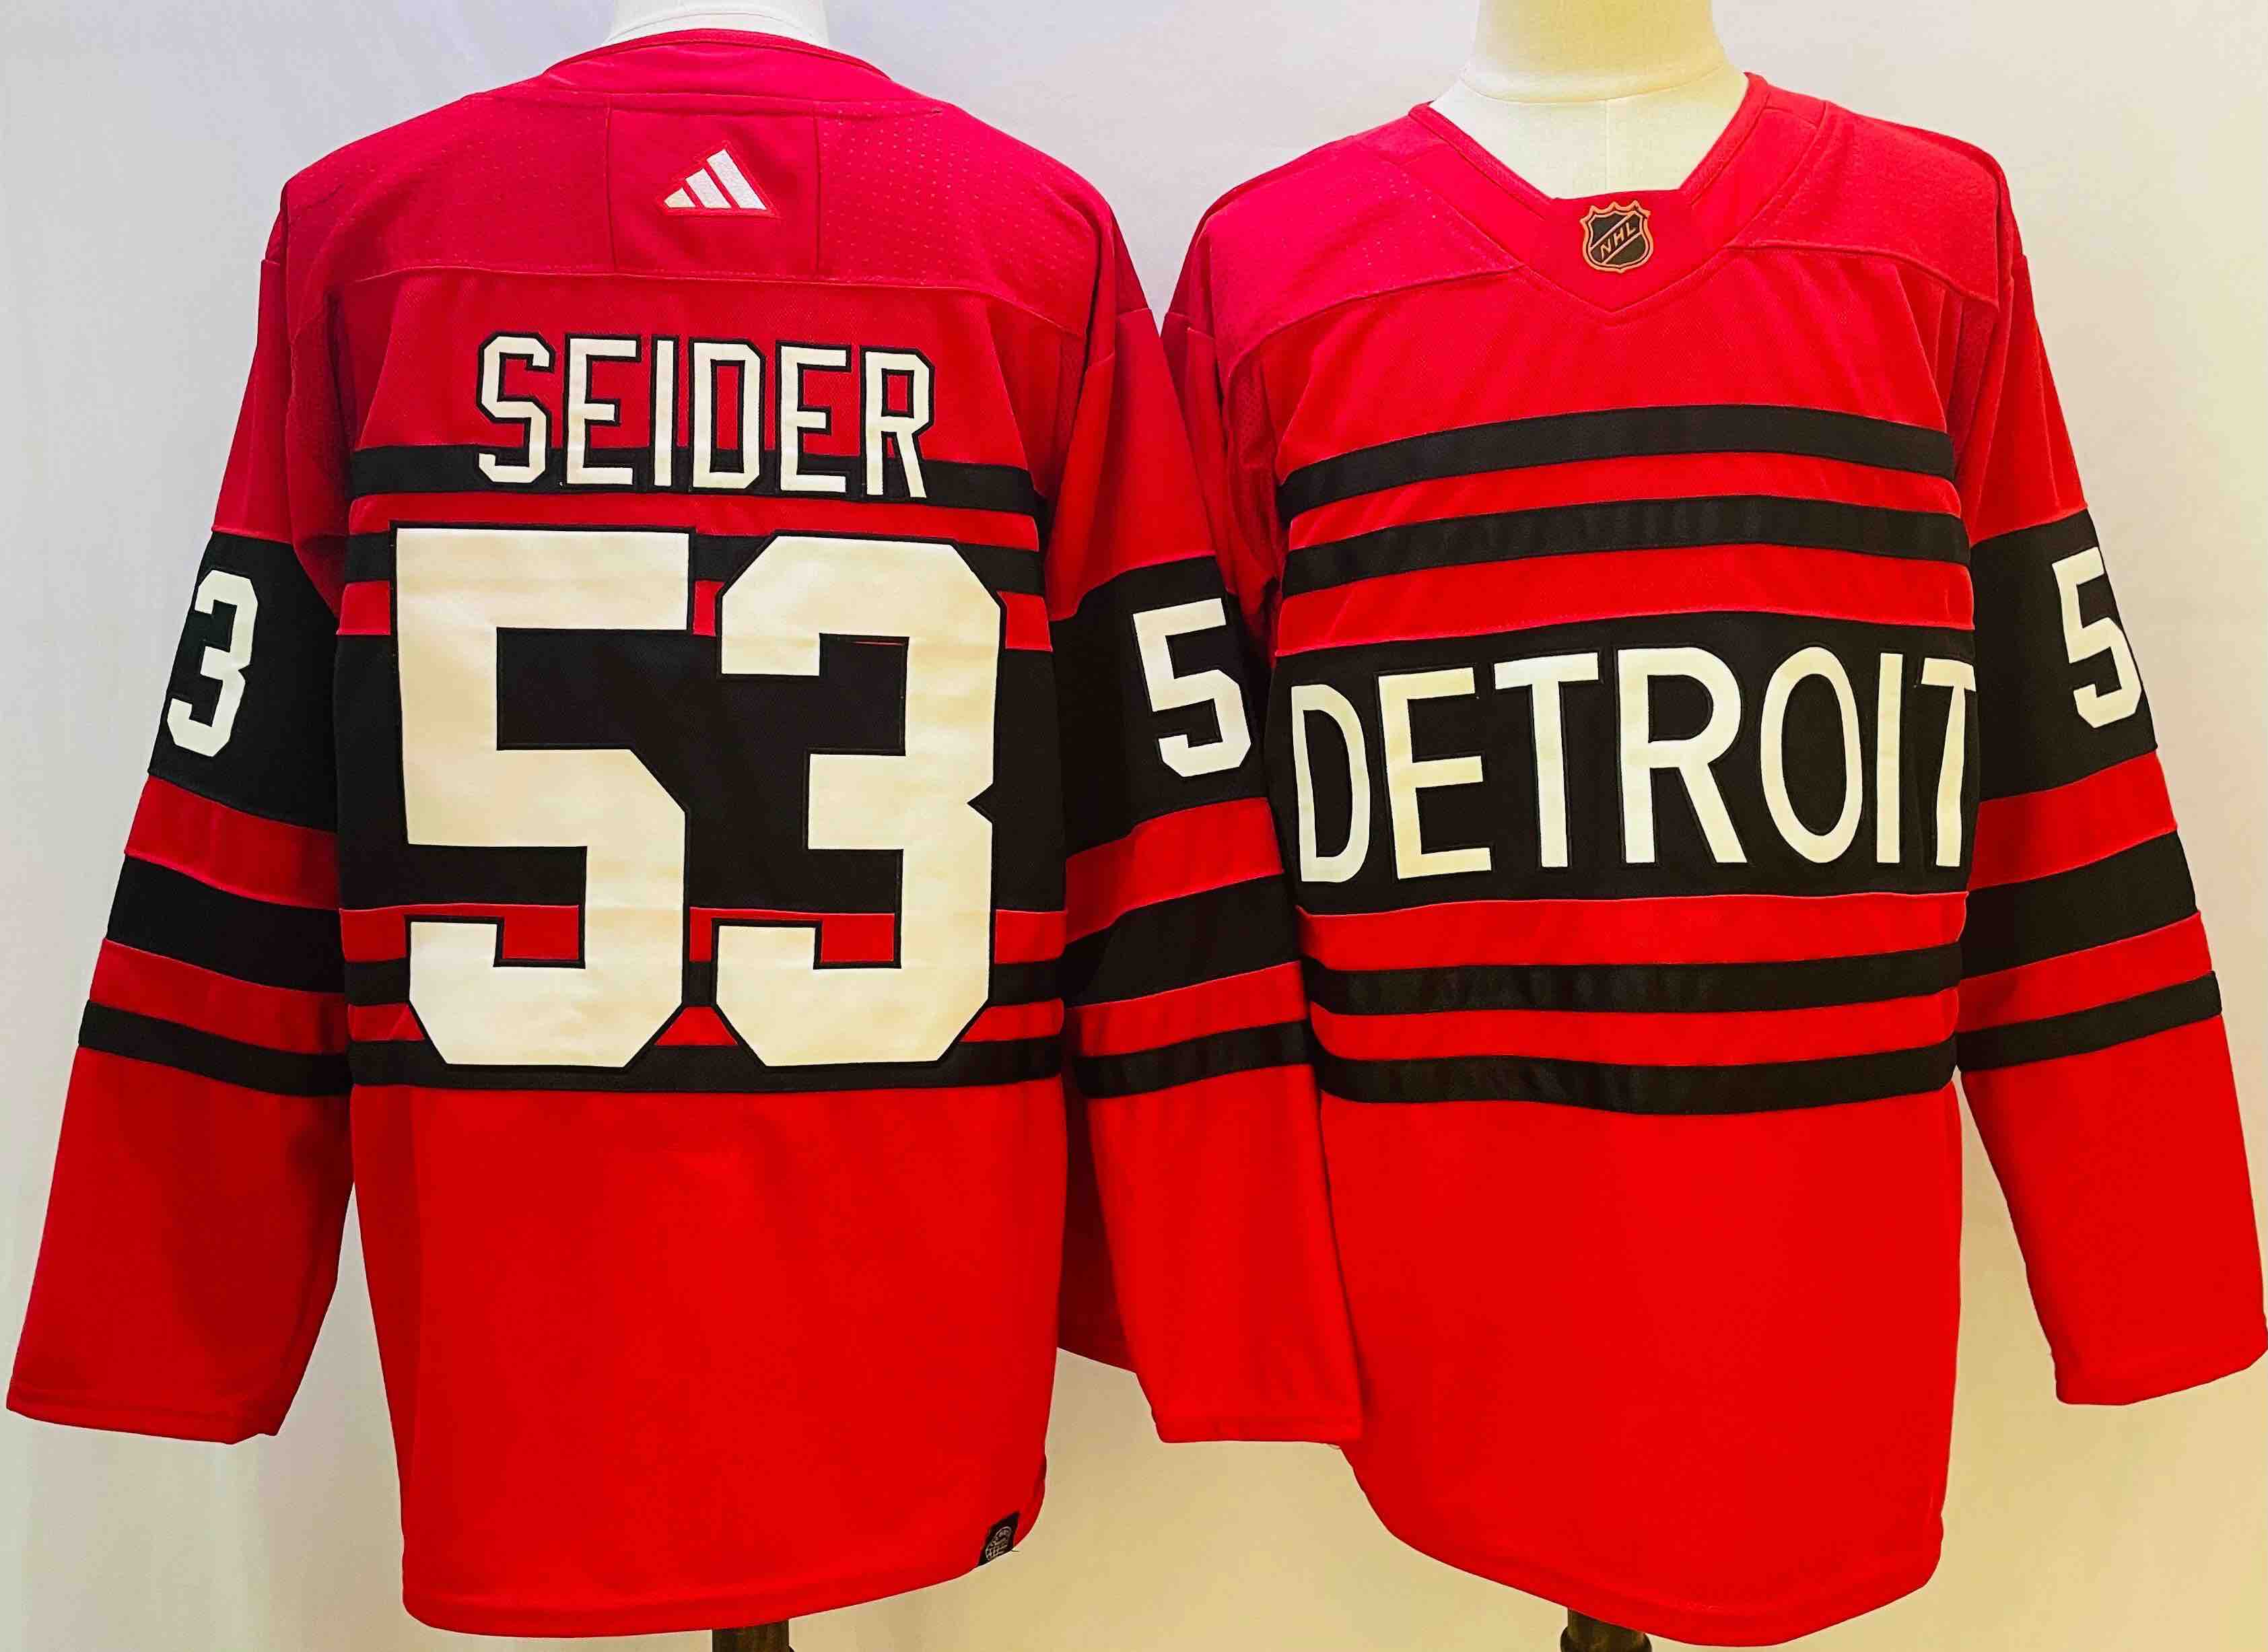 NHL Detroit Red Wings #53 Seider Red Jersey